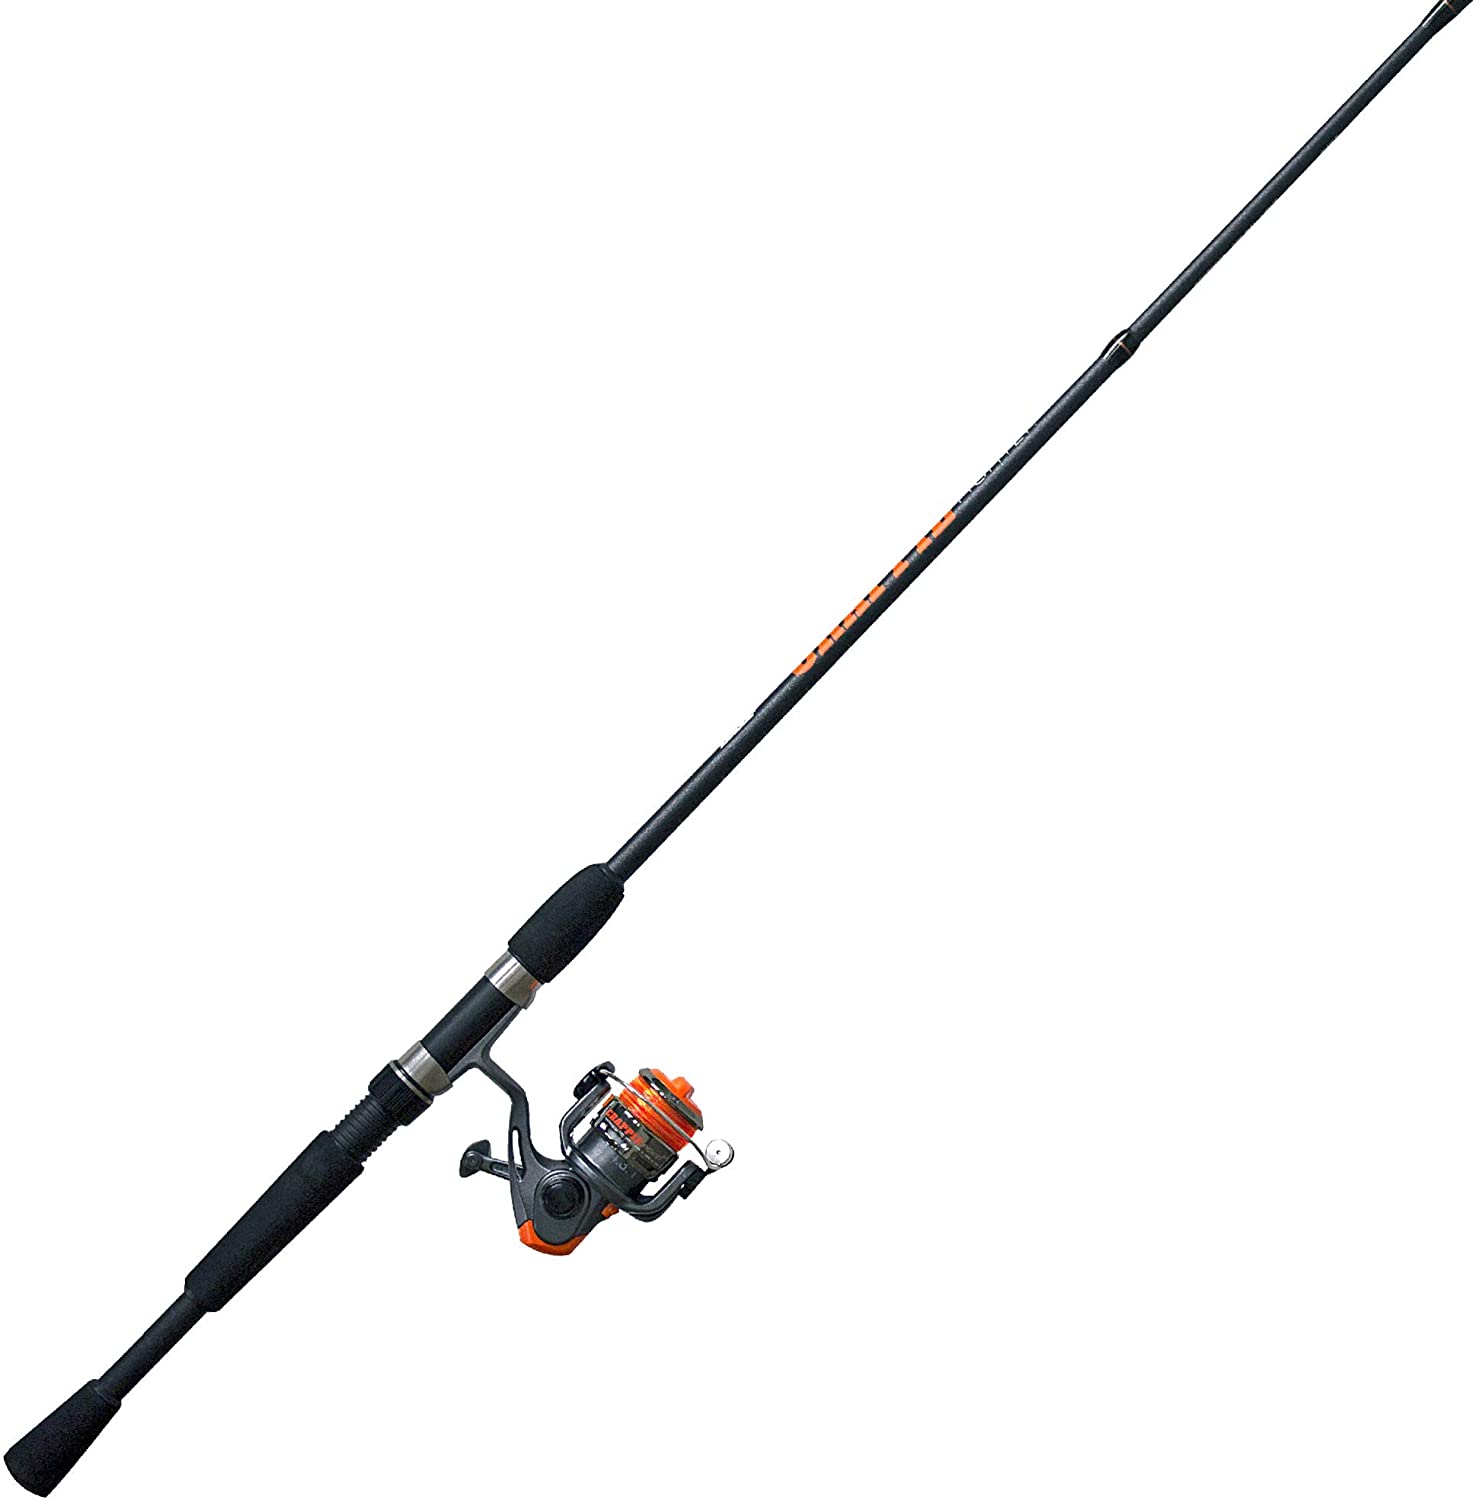 Zebco Fishing Rod & Reel Combos in Fishing Rod & Reel Combos by Brand 